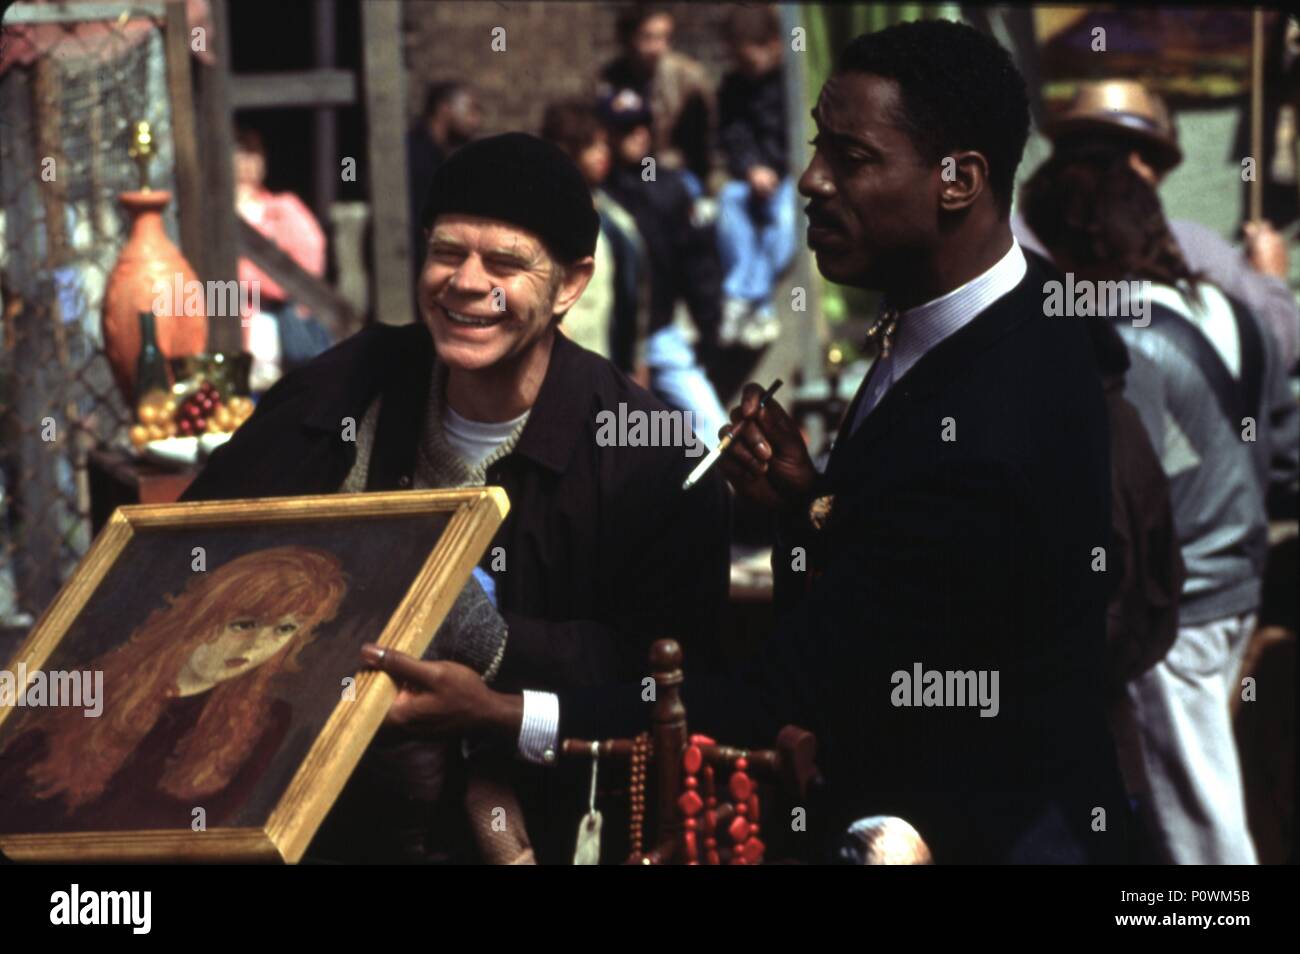 Original Film Title: WELCOME TO COLLINWOOD.  English Title: WELCOME TO COLLINWOOD.  Film Director: ANTHONY RUSSO.  Year: 2002.  Stars: WILLIAM H. MACY; ISAIAH WASHINGTON. Credit: WARNER BROS. PICTURES / Album Stock Photo